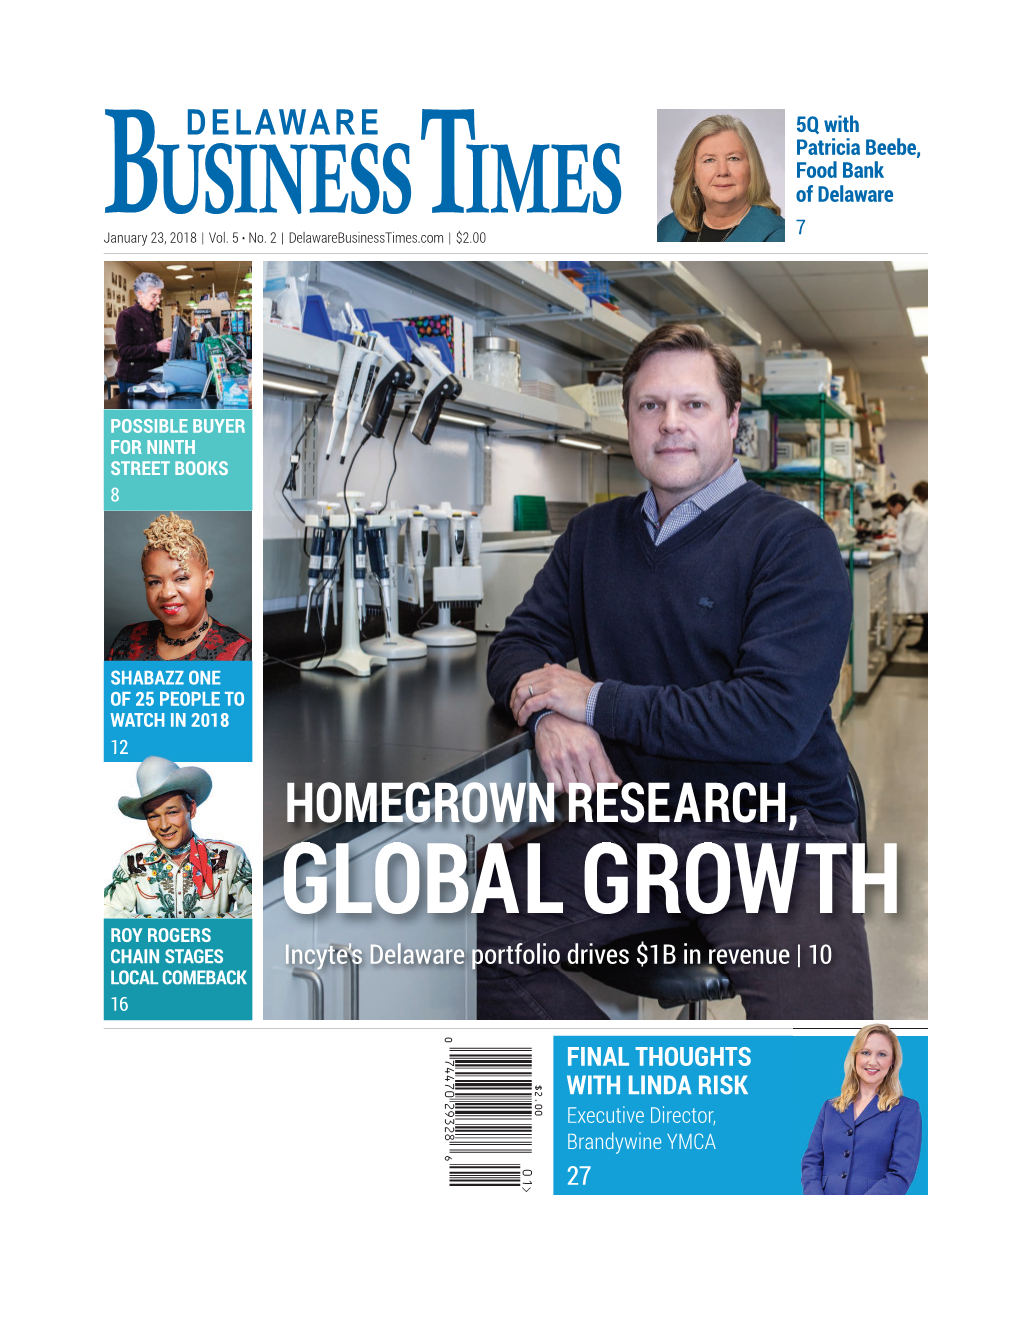 HOMEGROWN RESEARCH, GLOBAL GROWTH ROY ROGERS CHAIN STAGES Incyte's Delaware Portfolio Drives $1B in Revenue | 10 LOCAL COMEBACK 16